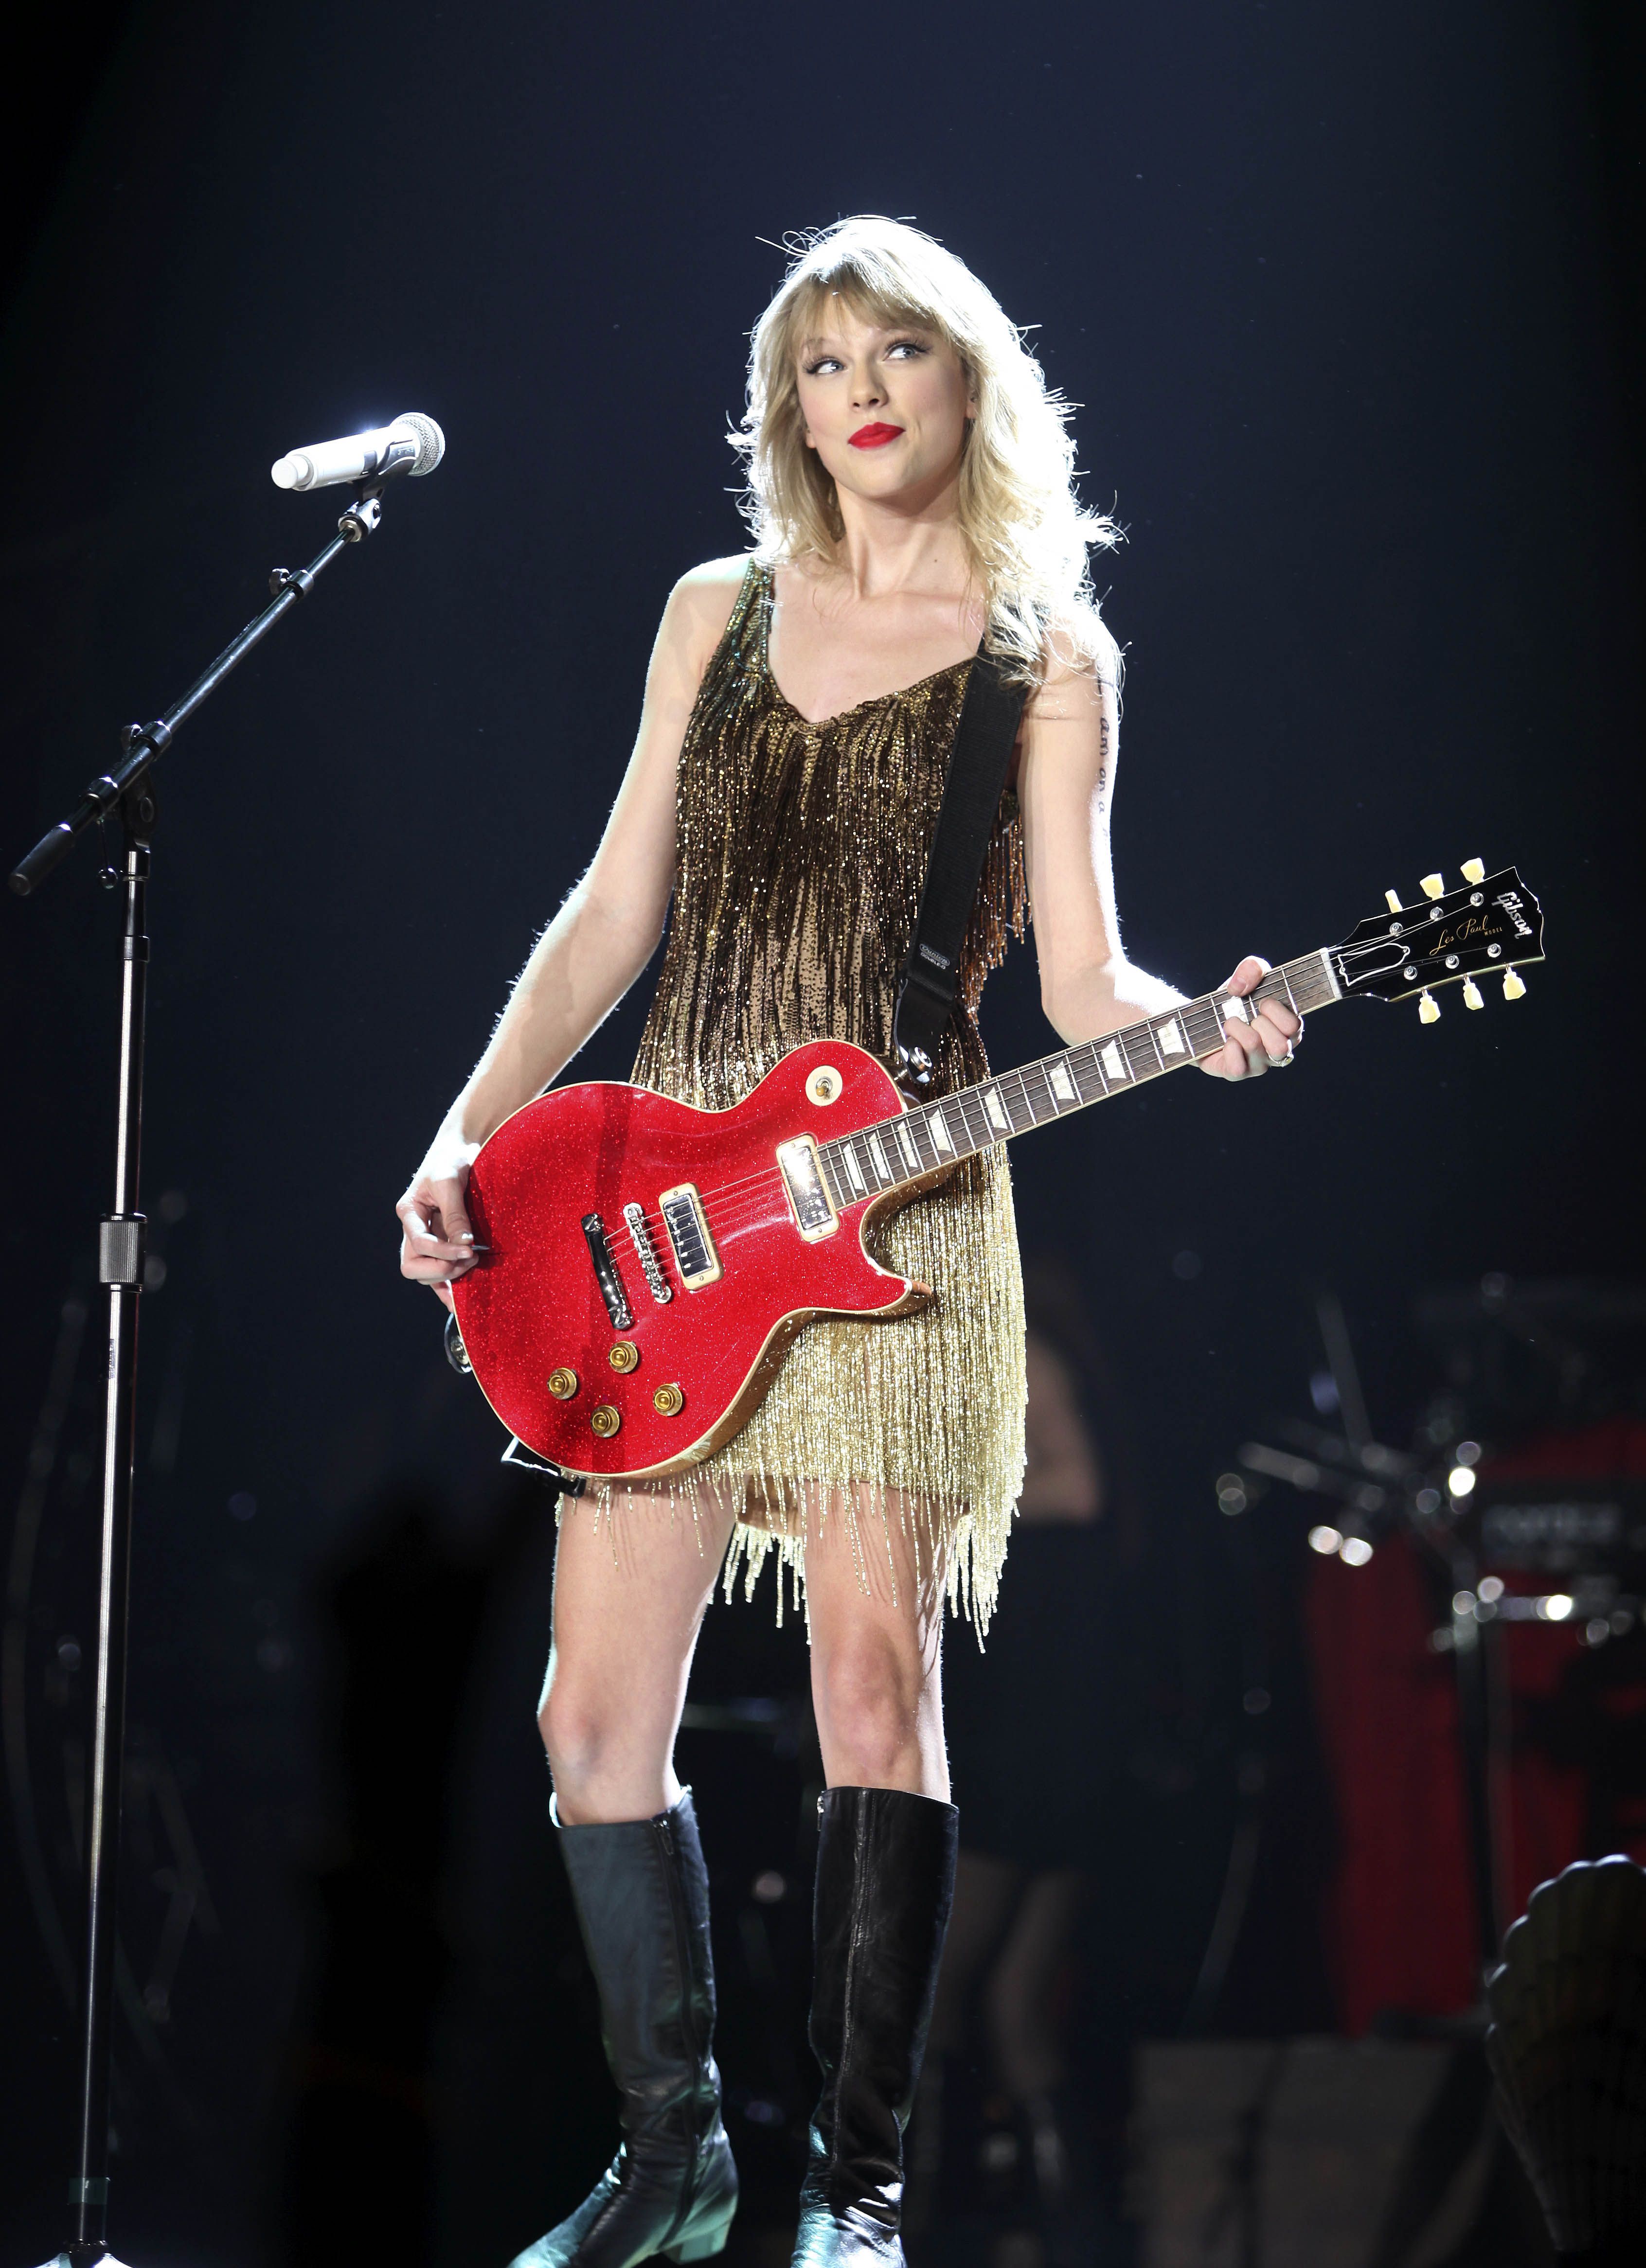 Picture of Taylor Swift in Speak Now World Tour - taylor-swift-1330716935.jpg | Teen ...3384 x 4664